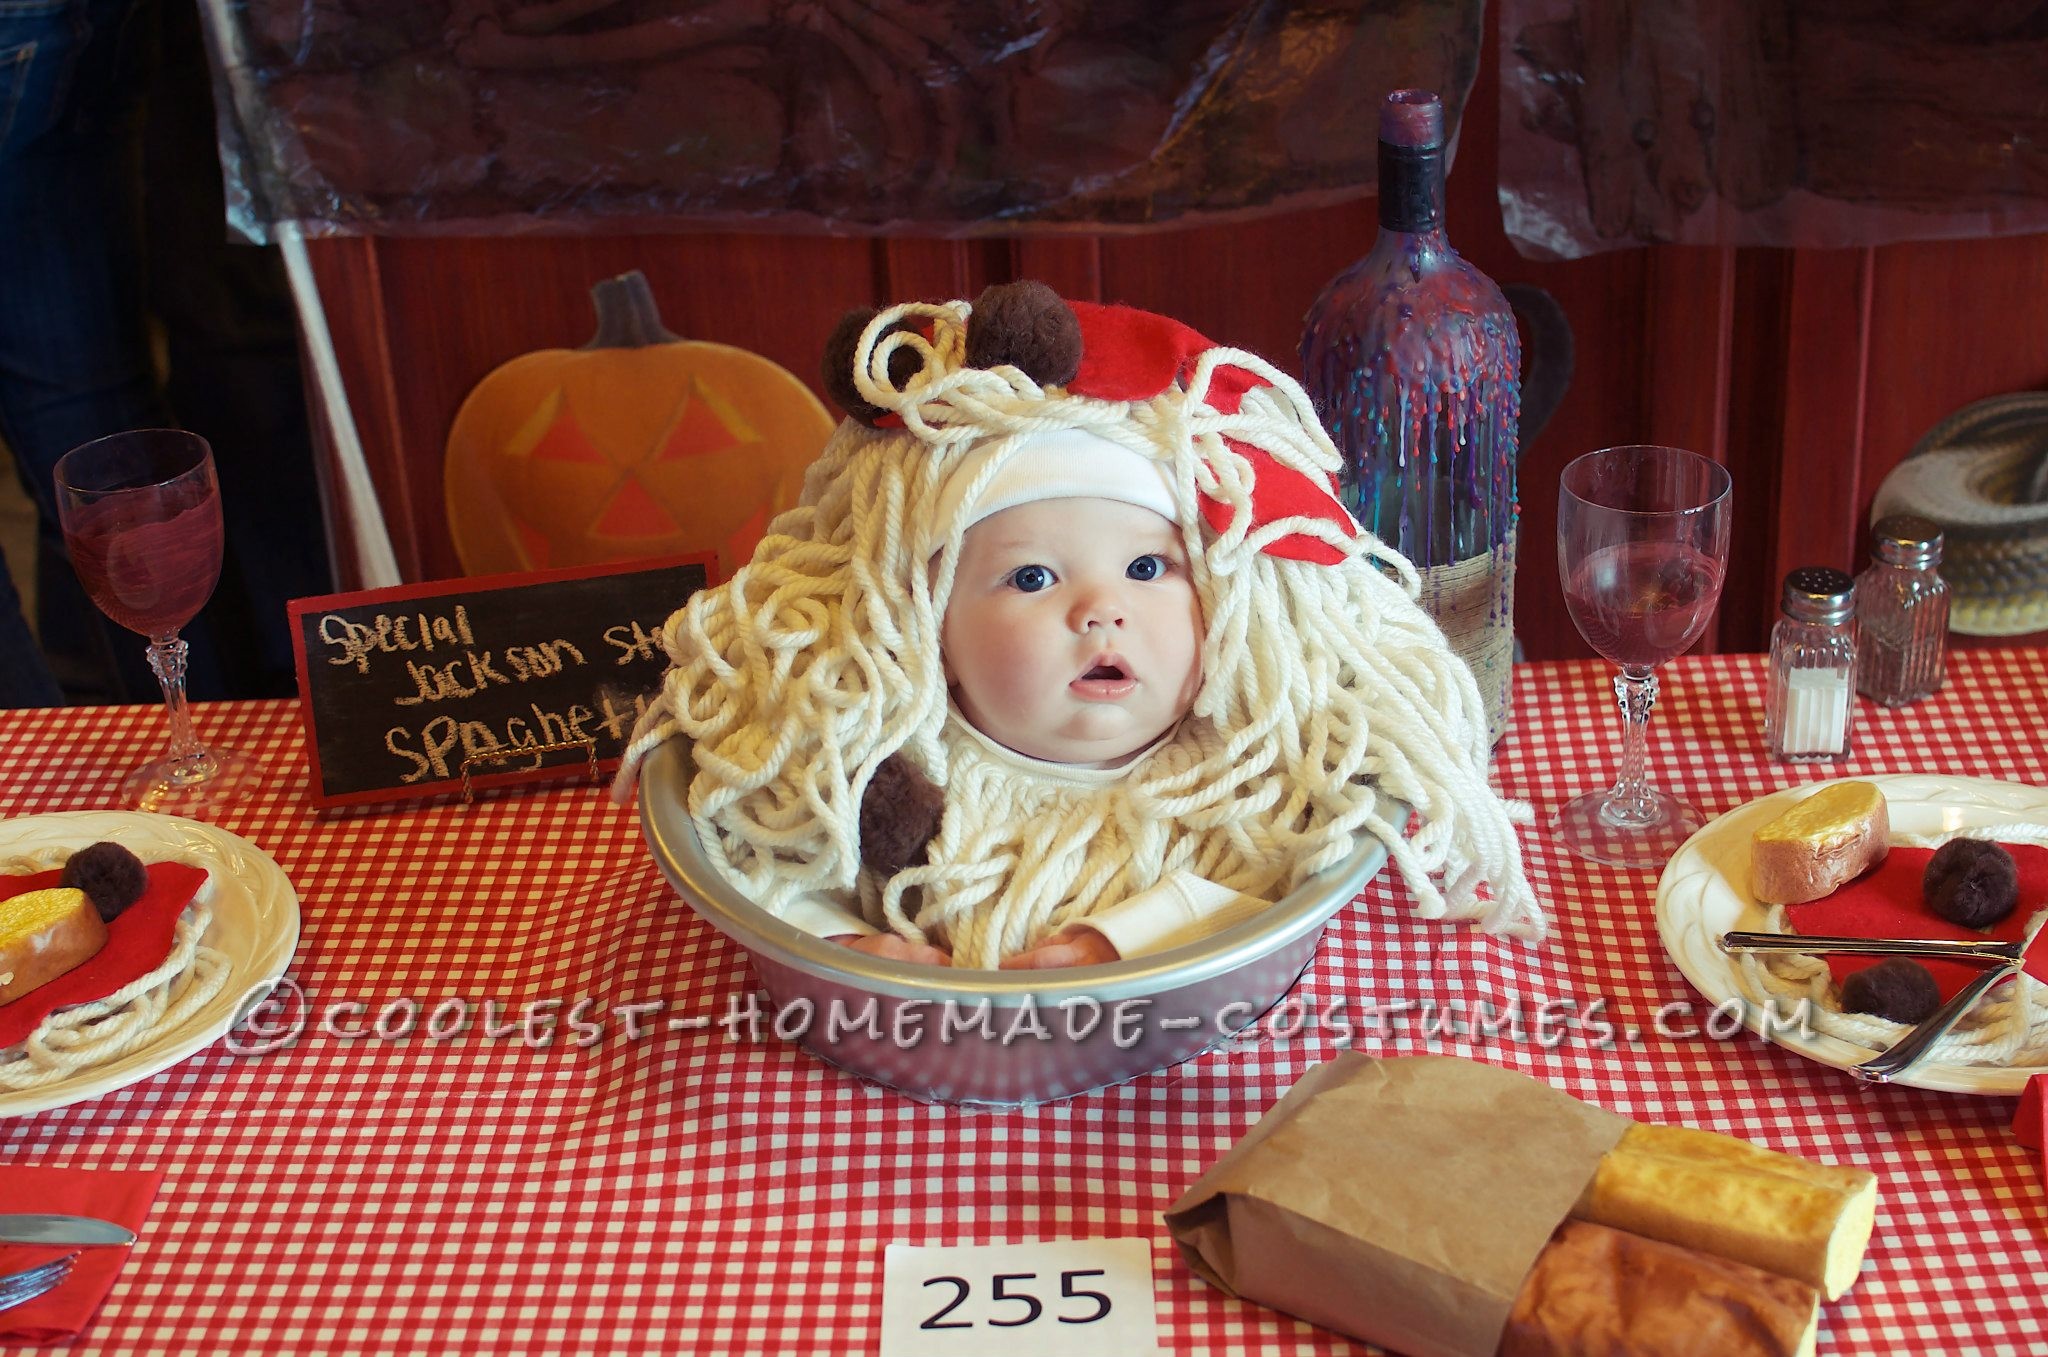 Most Adorable Homemade Bowl of Spaghetti Ever!